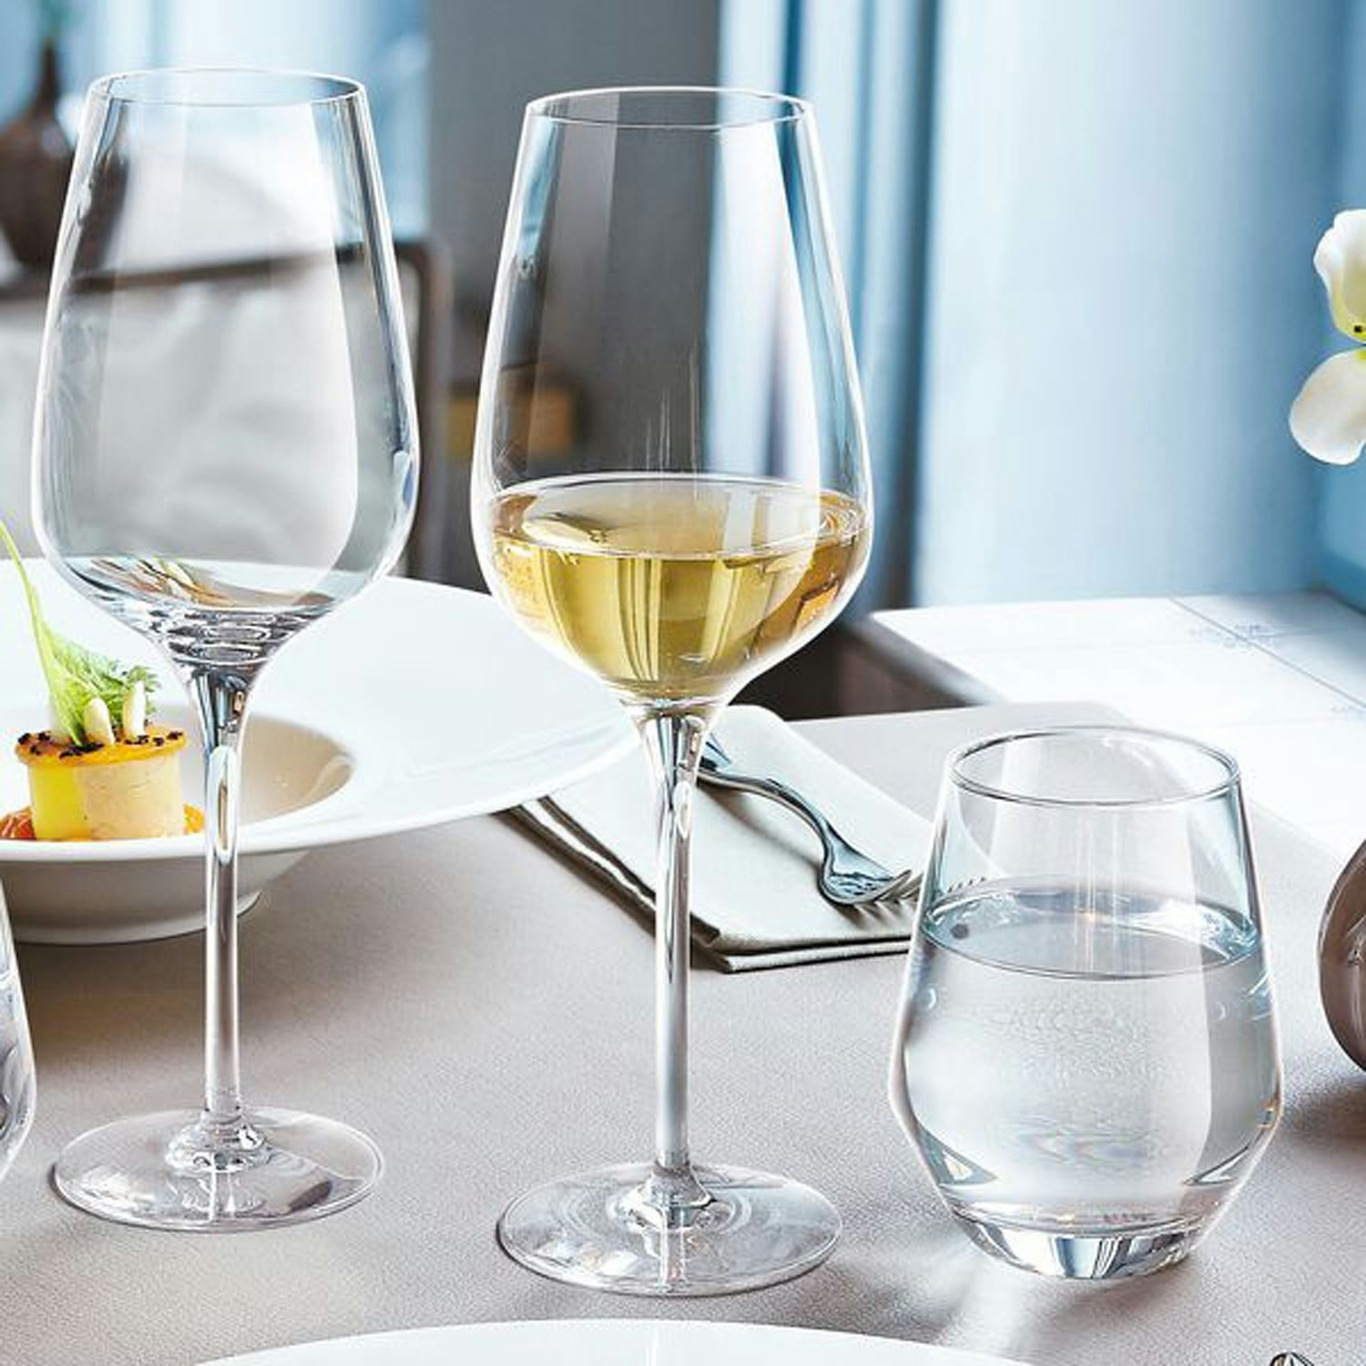 https://royaldesign.com/image/2/chefsommelier-sublym-white-wine-glass-25-cl-6-pack-1?w=800&quality=80